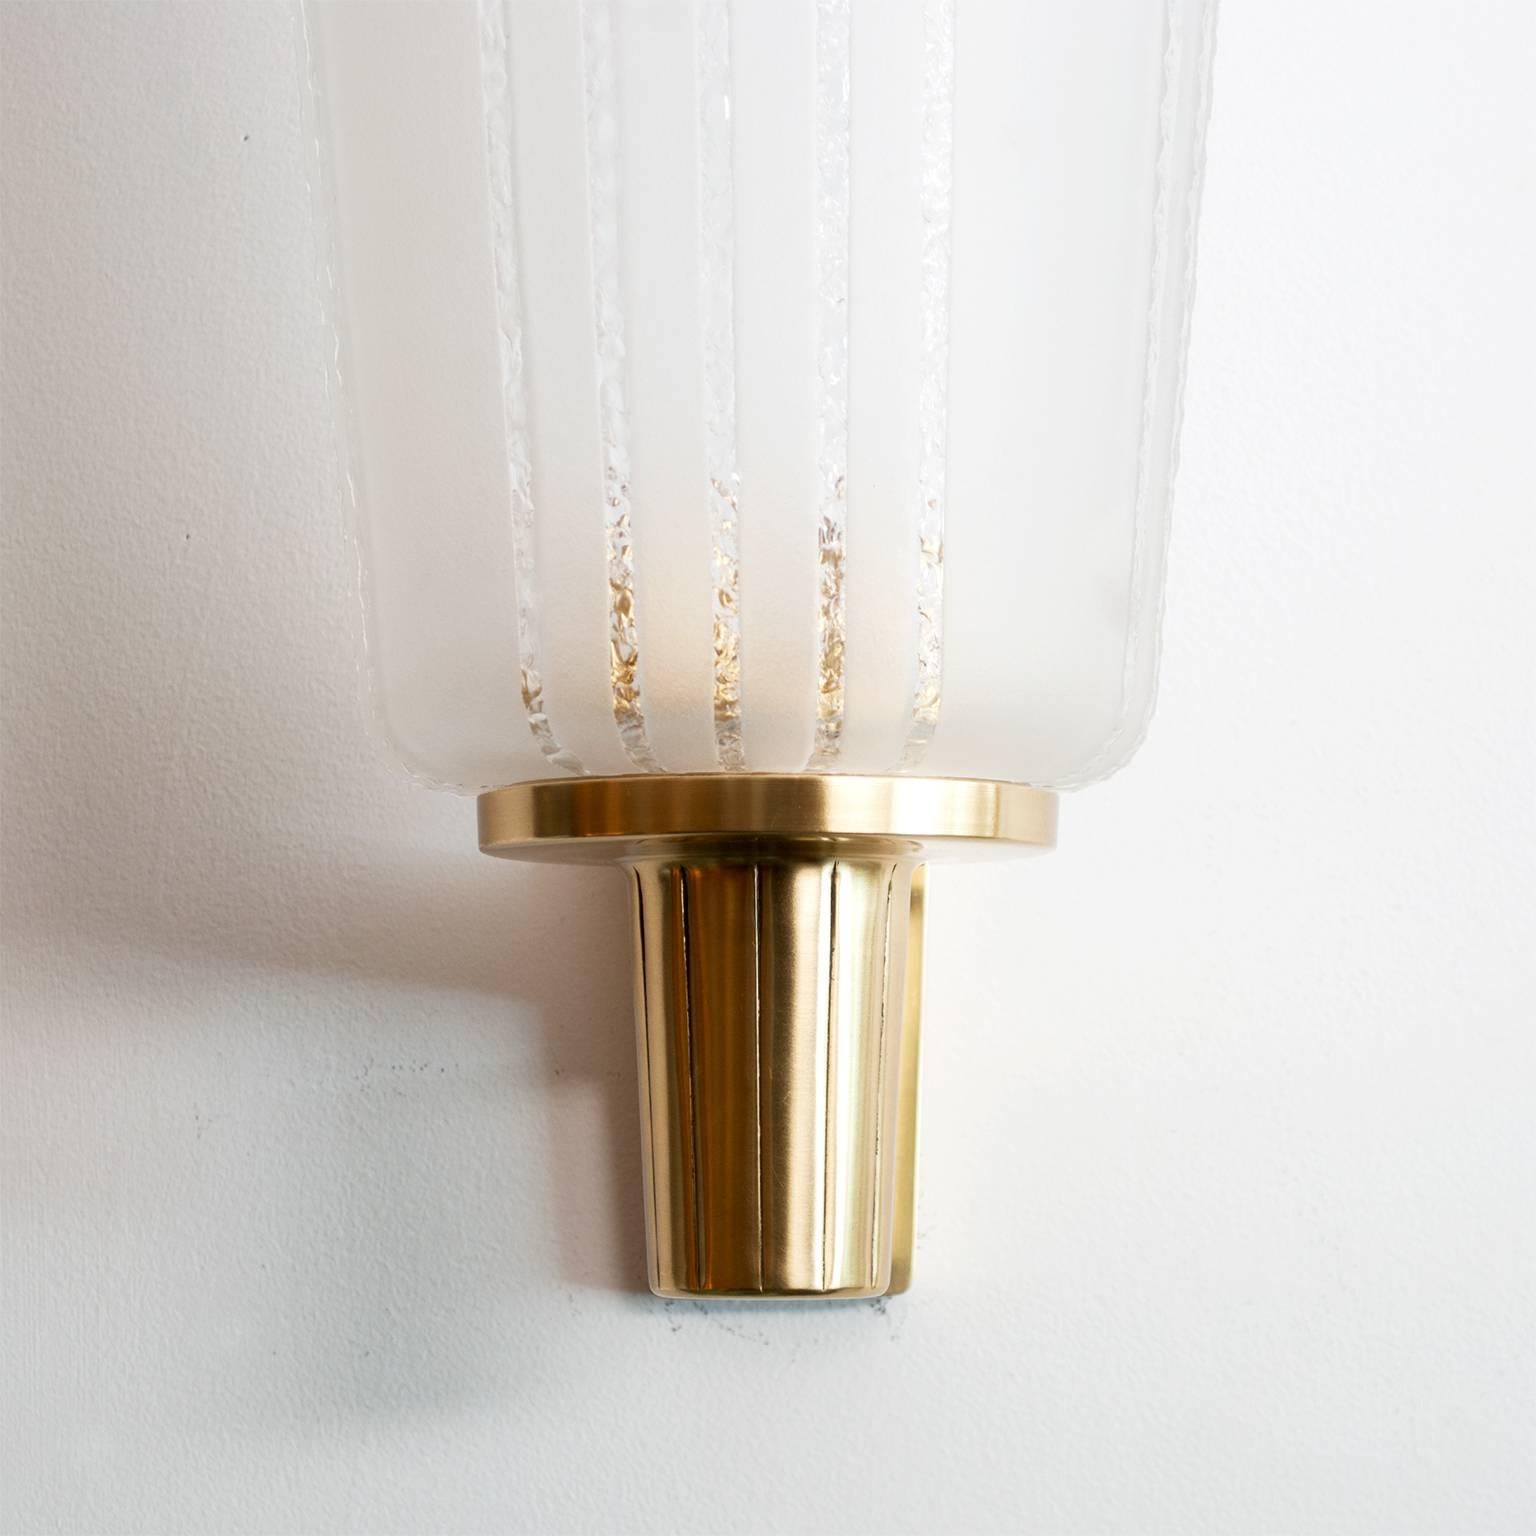 20th Century Large Pair of Scandinavian Modern Etched Glass and Brass Sconces Orrefors